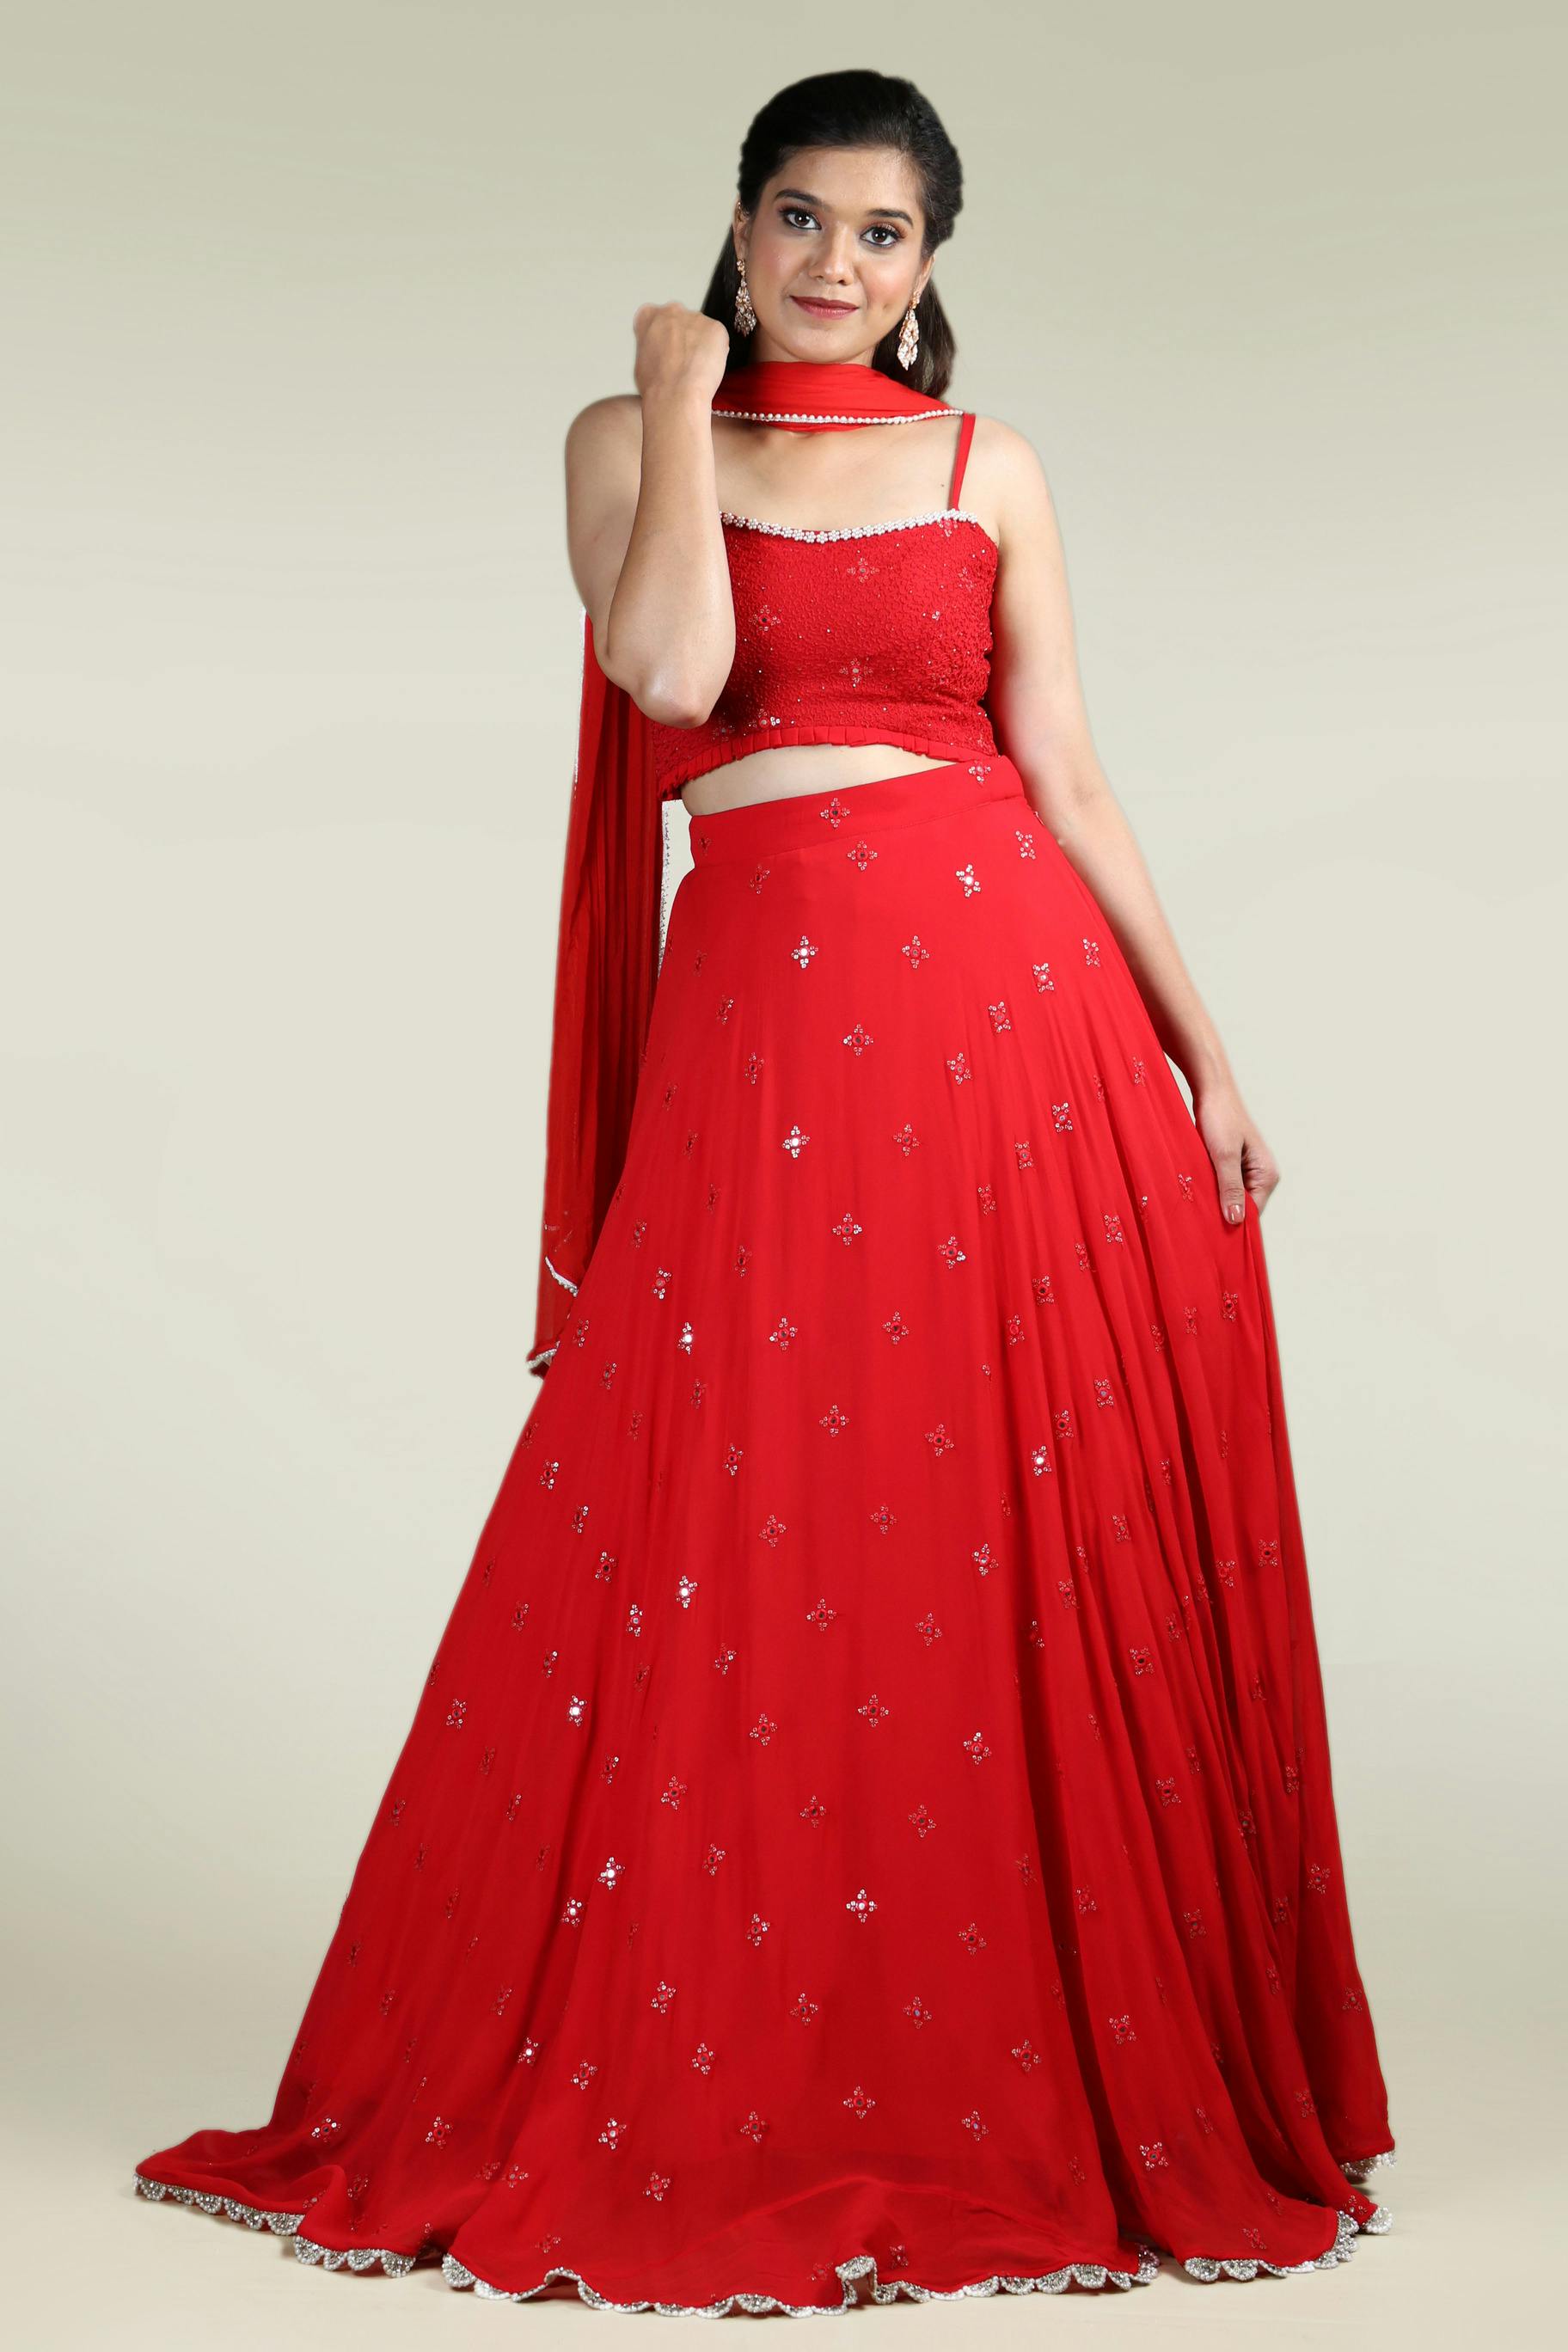 Turn Heads this Valentine's Day with Our Red Georgette Lehenga